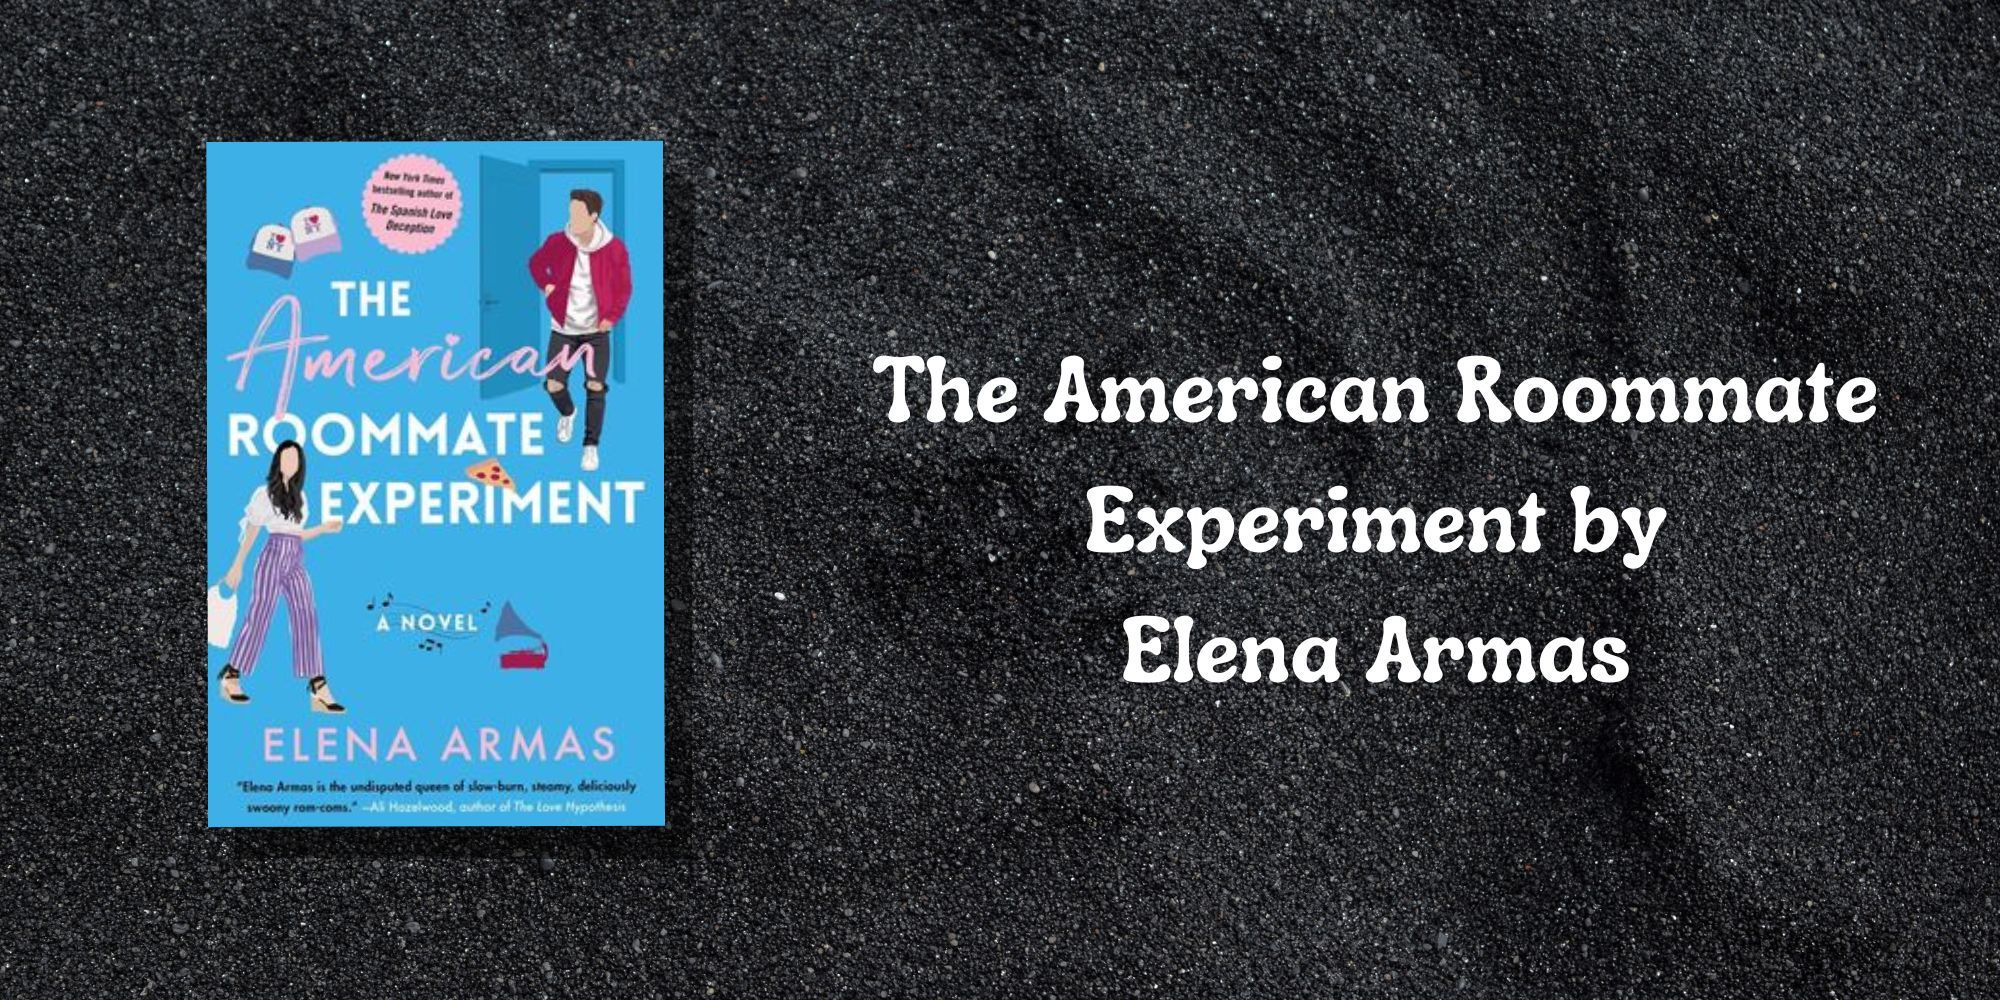 The American Roommate Experience by Elena Armas